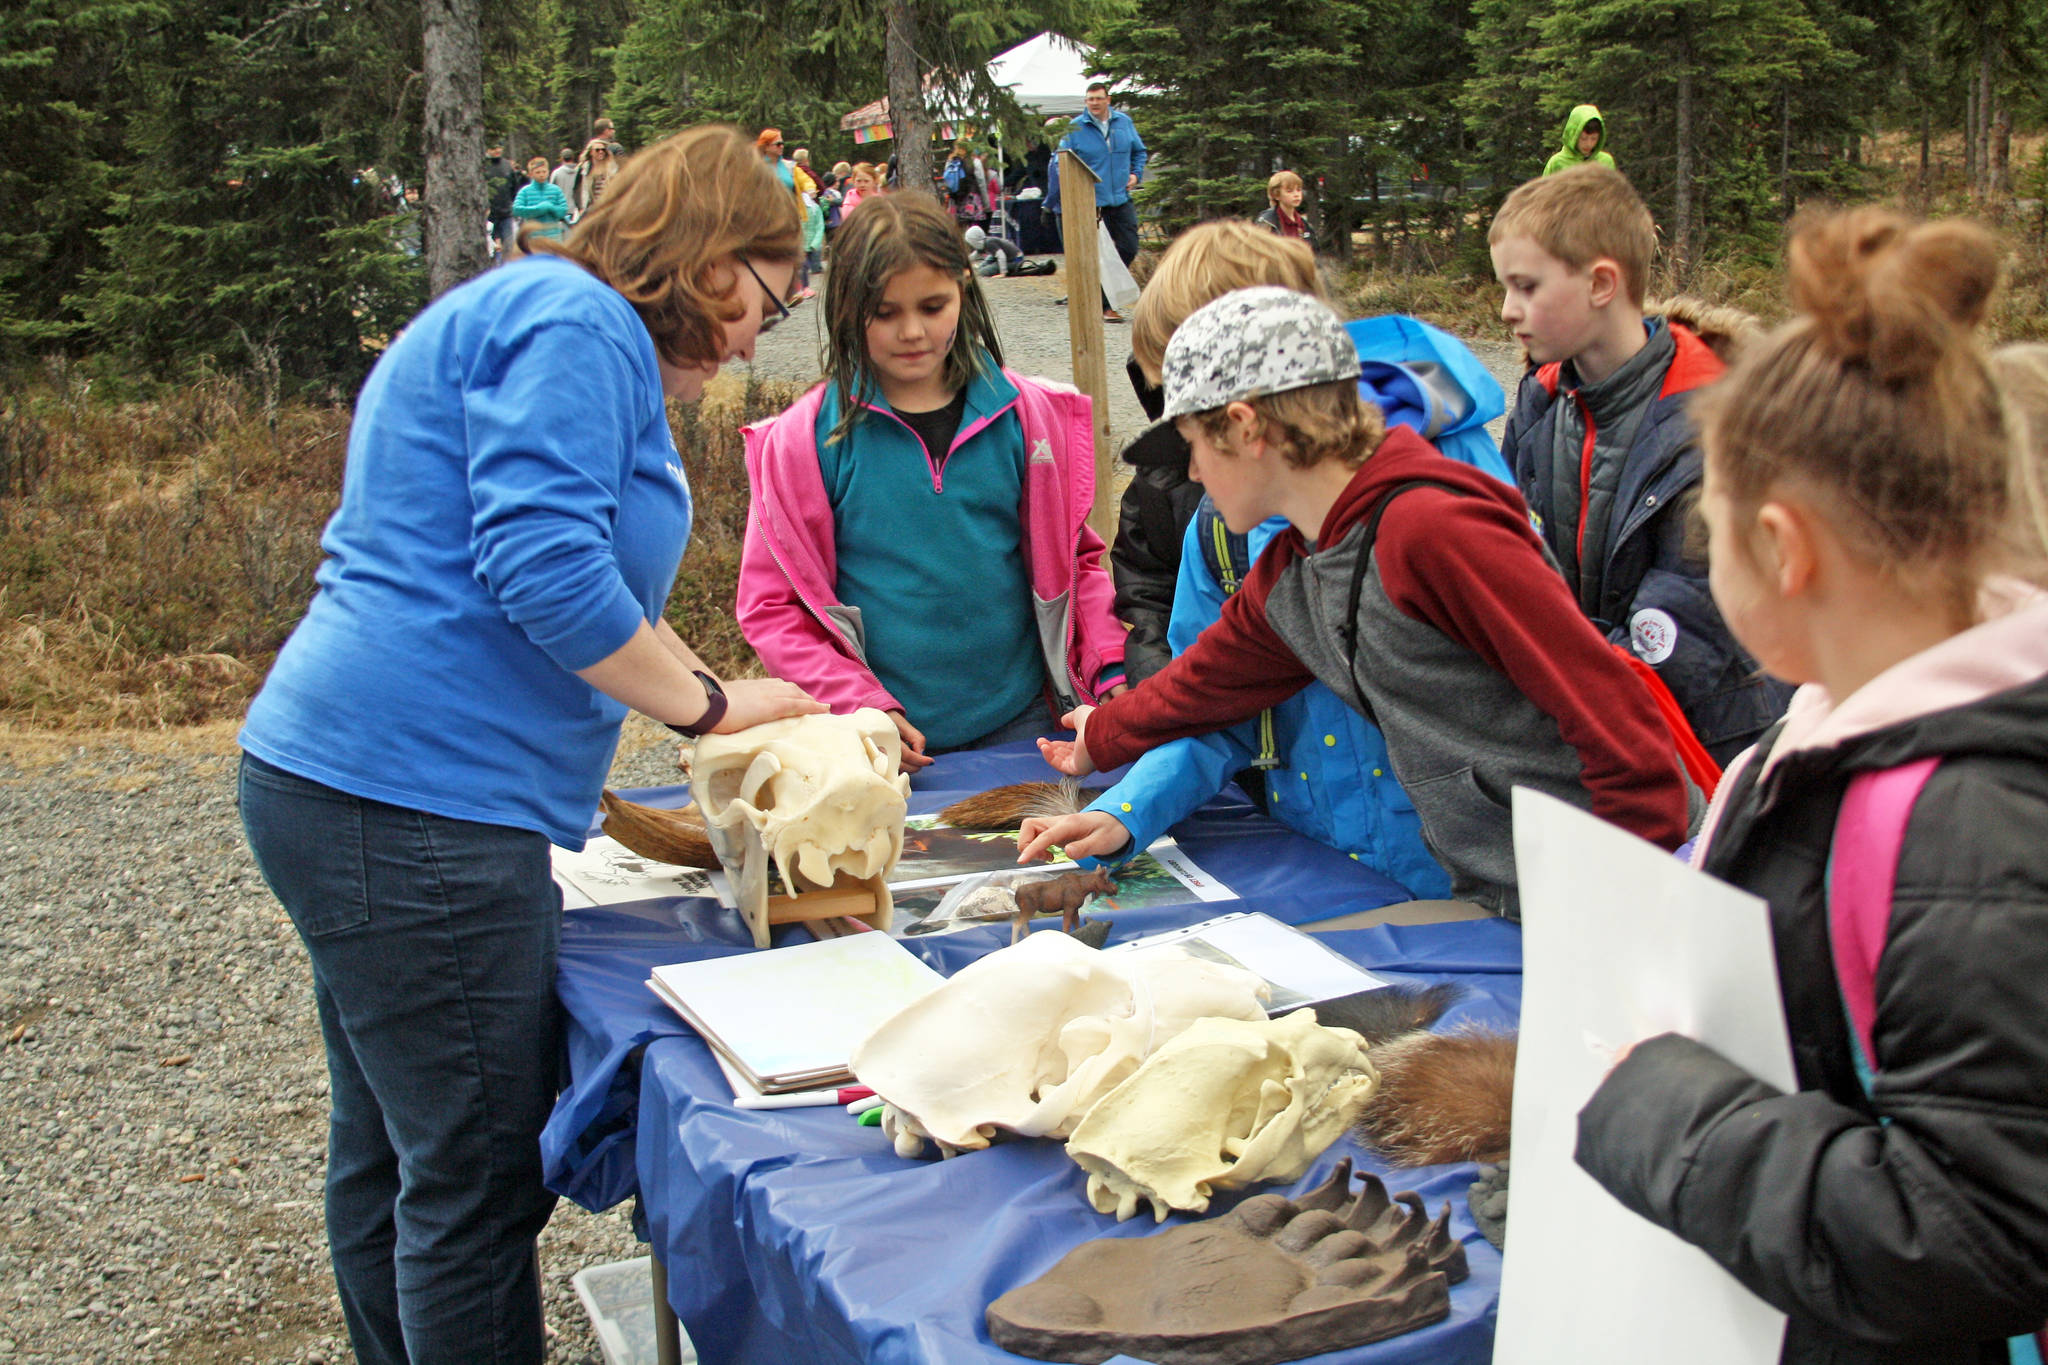 Students examine animal bones during the 18th Annual Kenai Peninsula Salmon Celebration at Johnson Lake State Recreation Site in Kasilof. The event featured hands-on activity and demonstration booths focused around wildlife education and safety. (Photo by Erin Thompson/Peninsula Clarion)